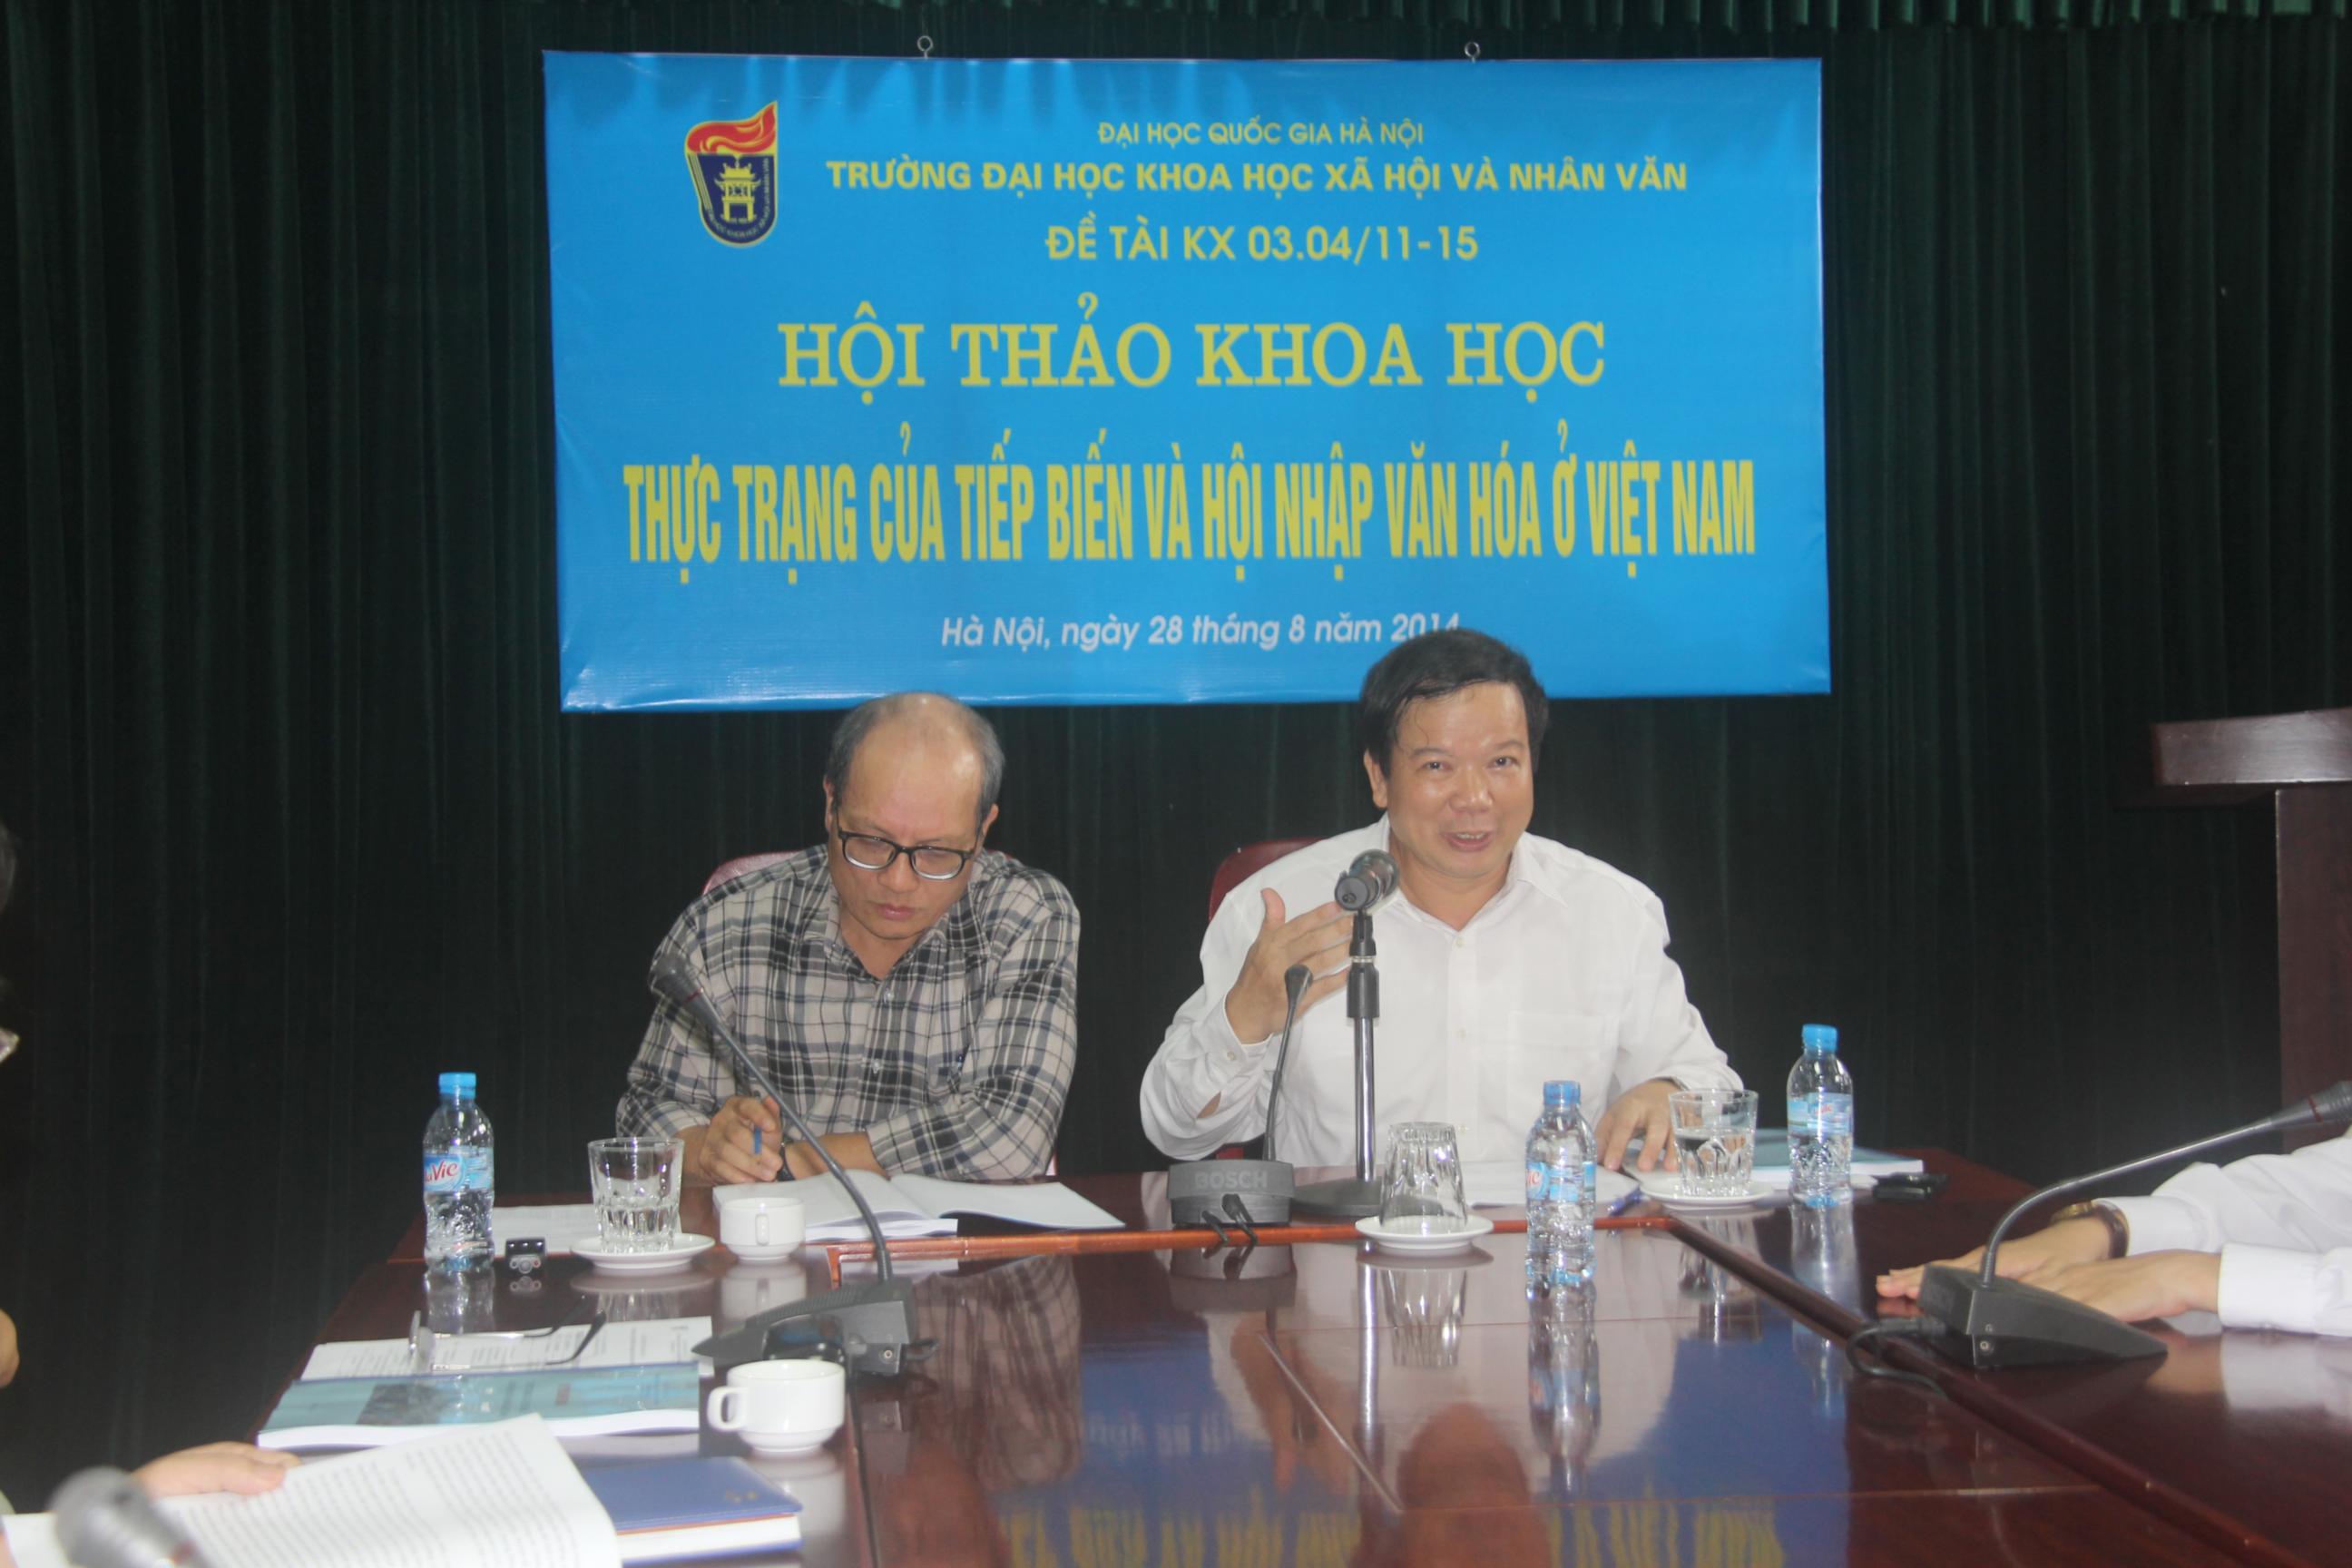 The status of acculturation and cultural integration in Vietnam